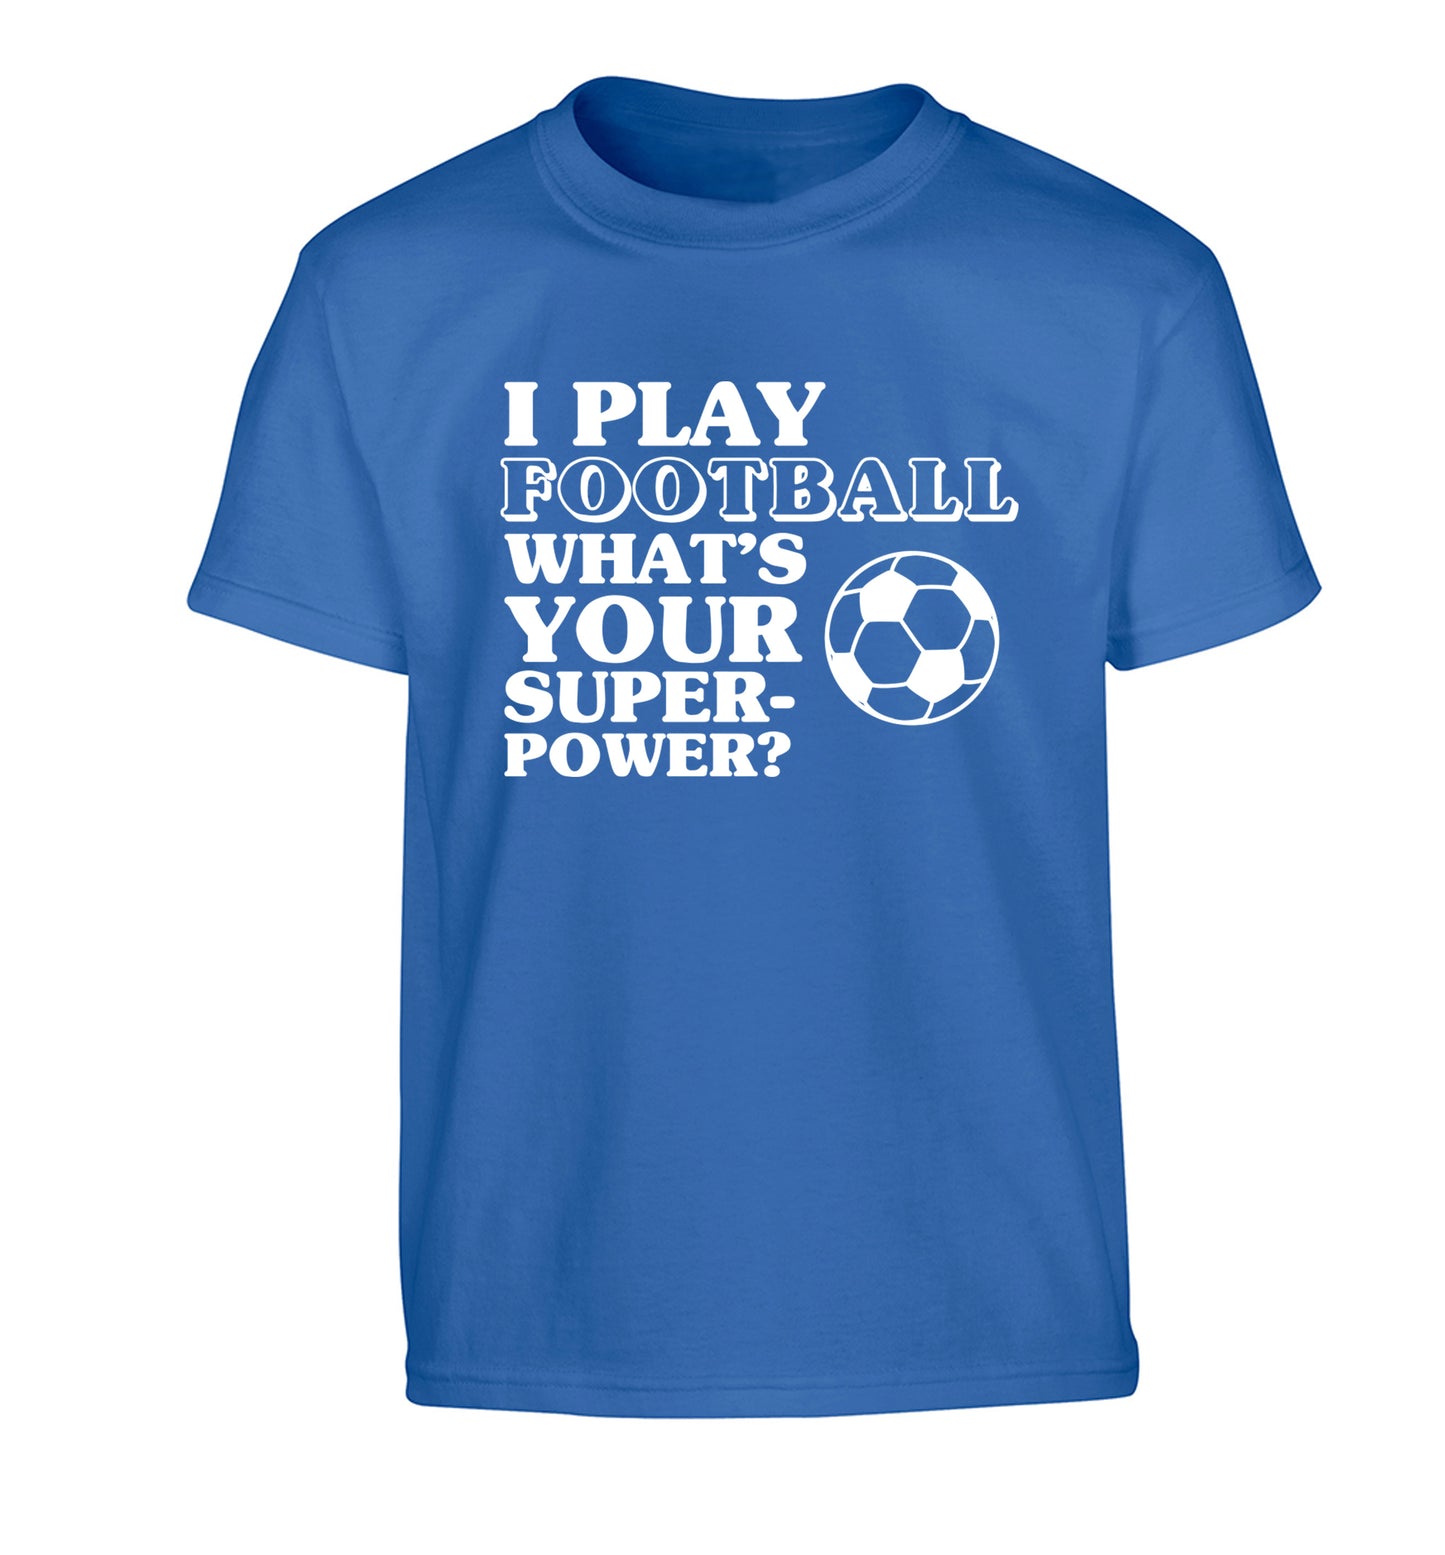 I play football what's your superpower? Children's blue Tshirt 12-14 Years